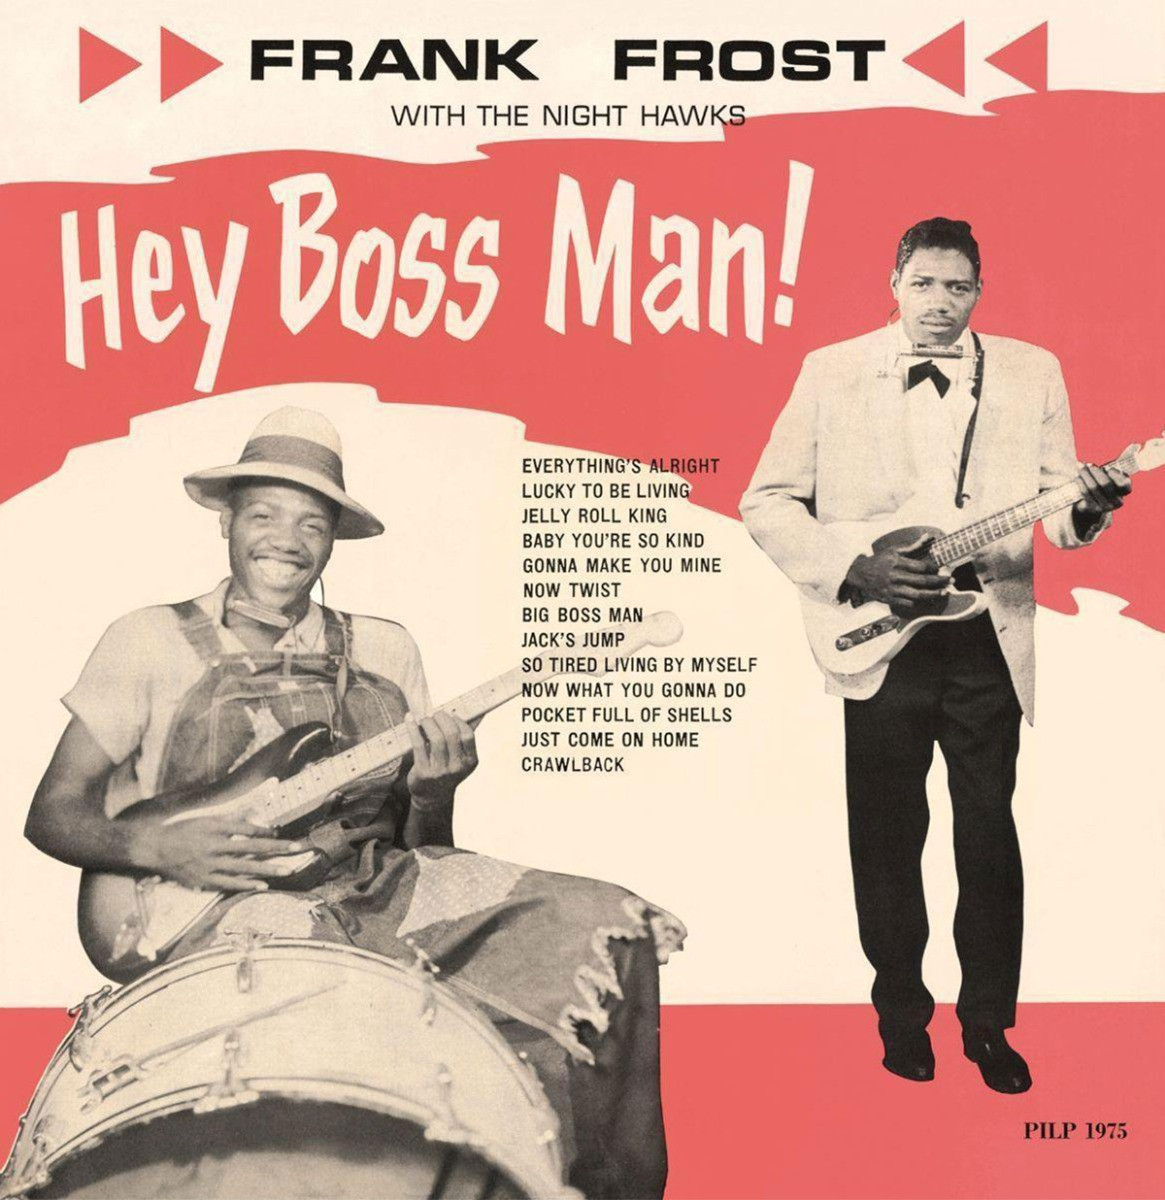 Frank Frost With The Night Hawks - Hey Boss Man! LP